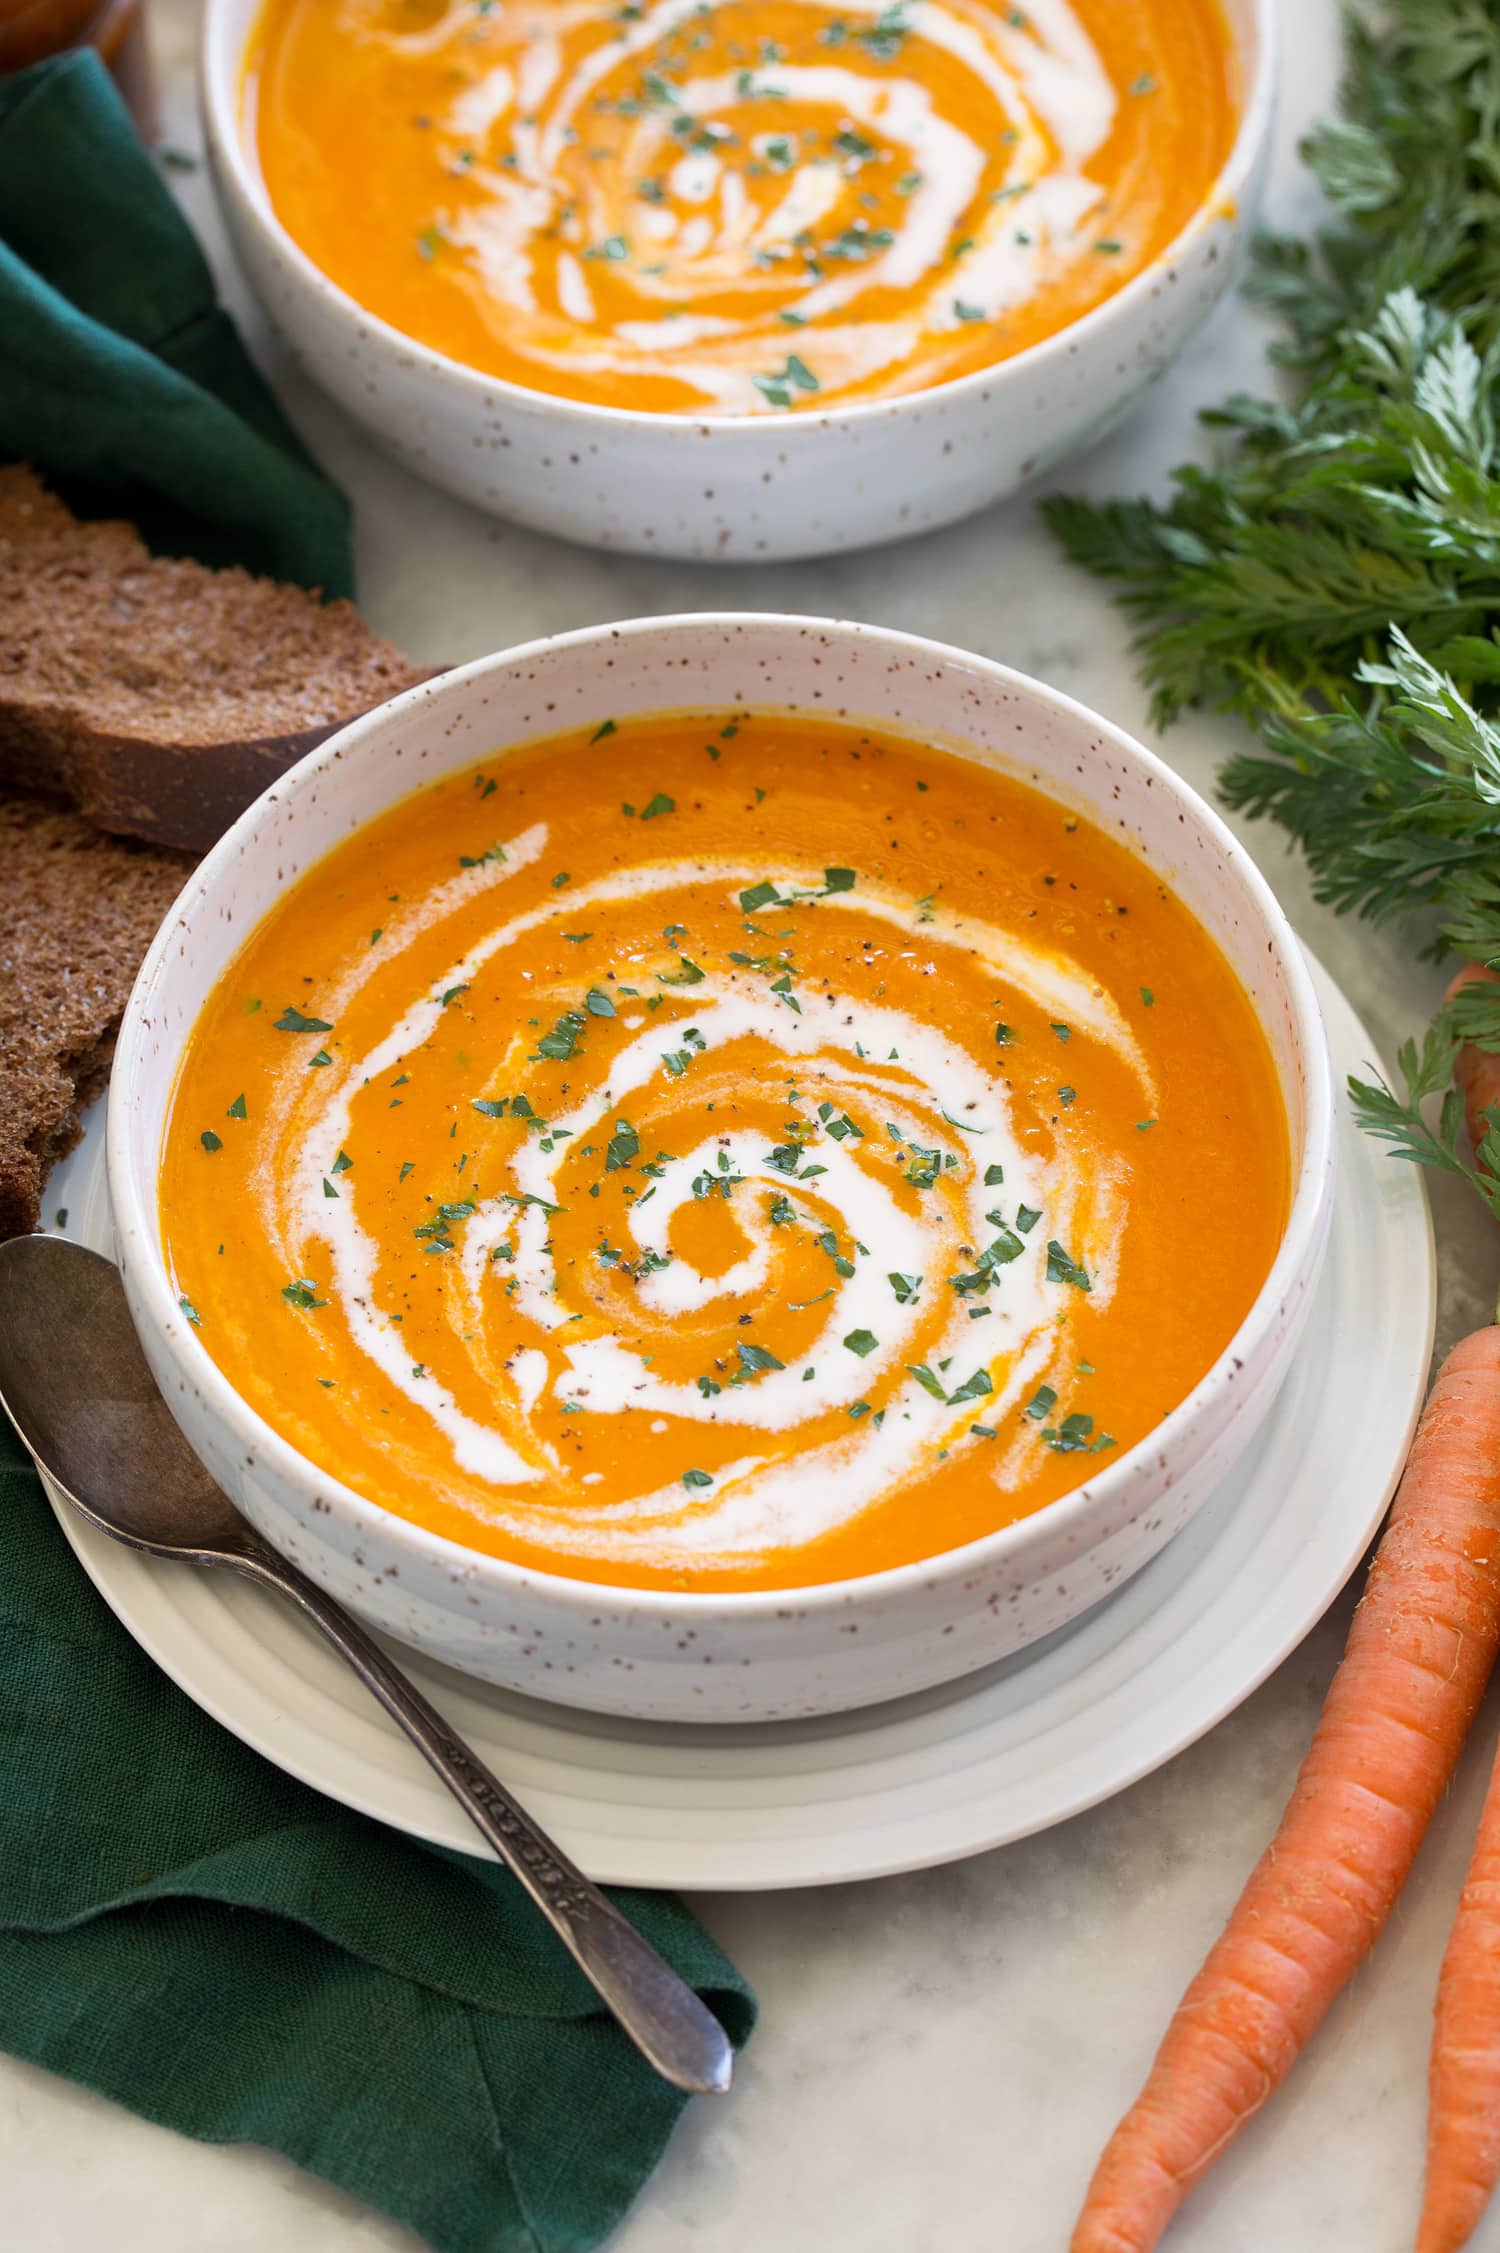 Single serving of carrot soup in a soup bowl with a second serving shown in the background.